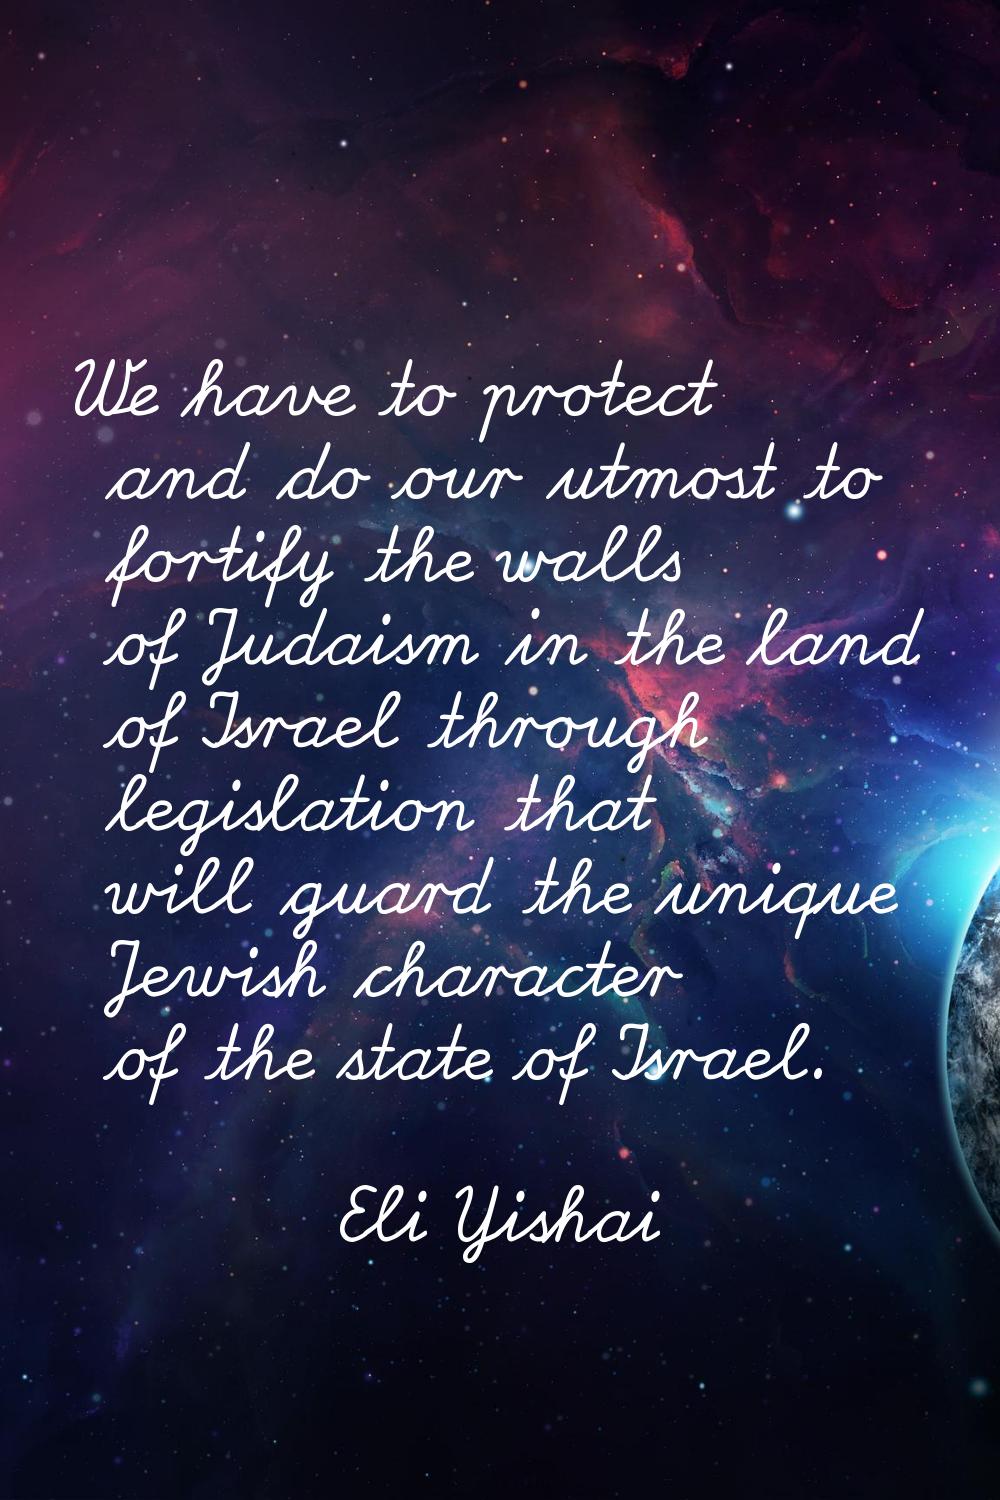 We have to protect and do our utmost to fortify the walls of Judaism in the land of Israel through 